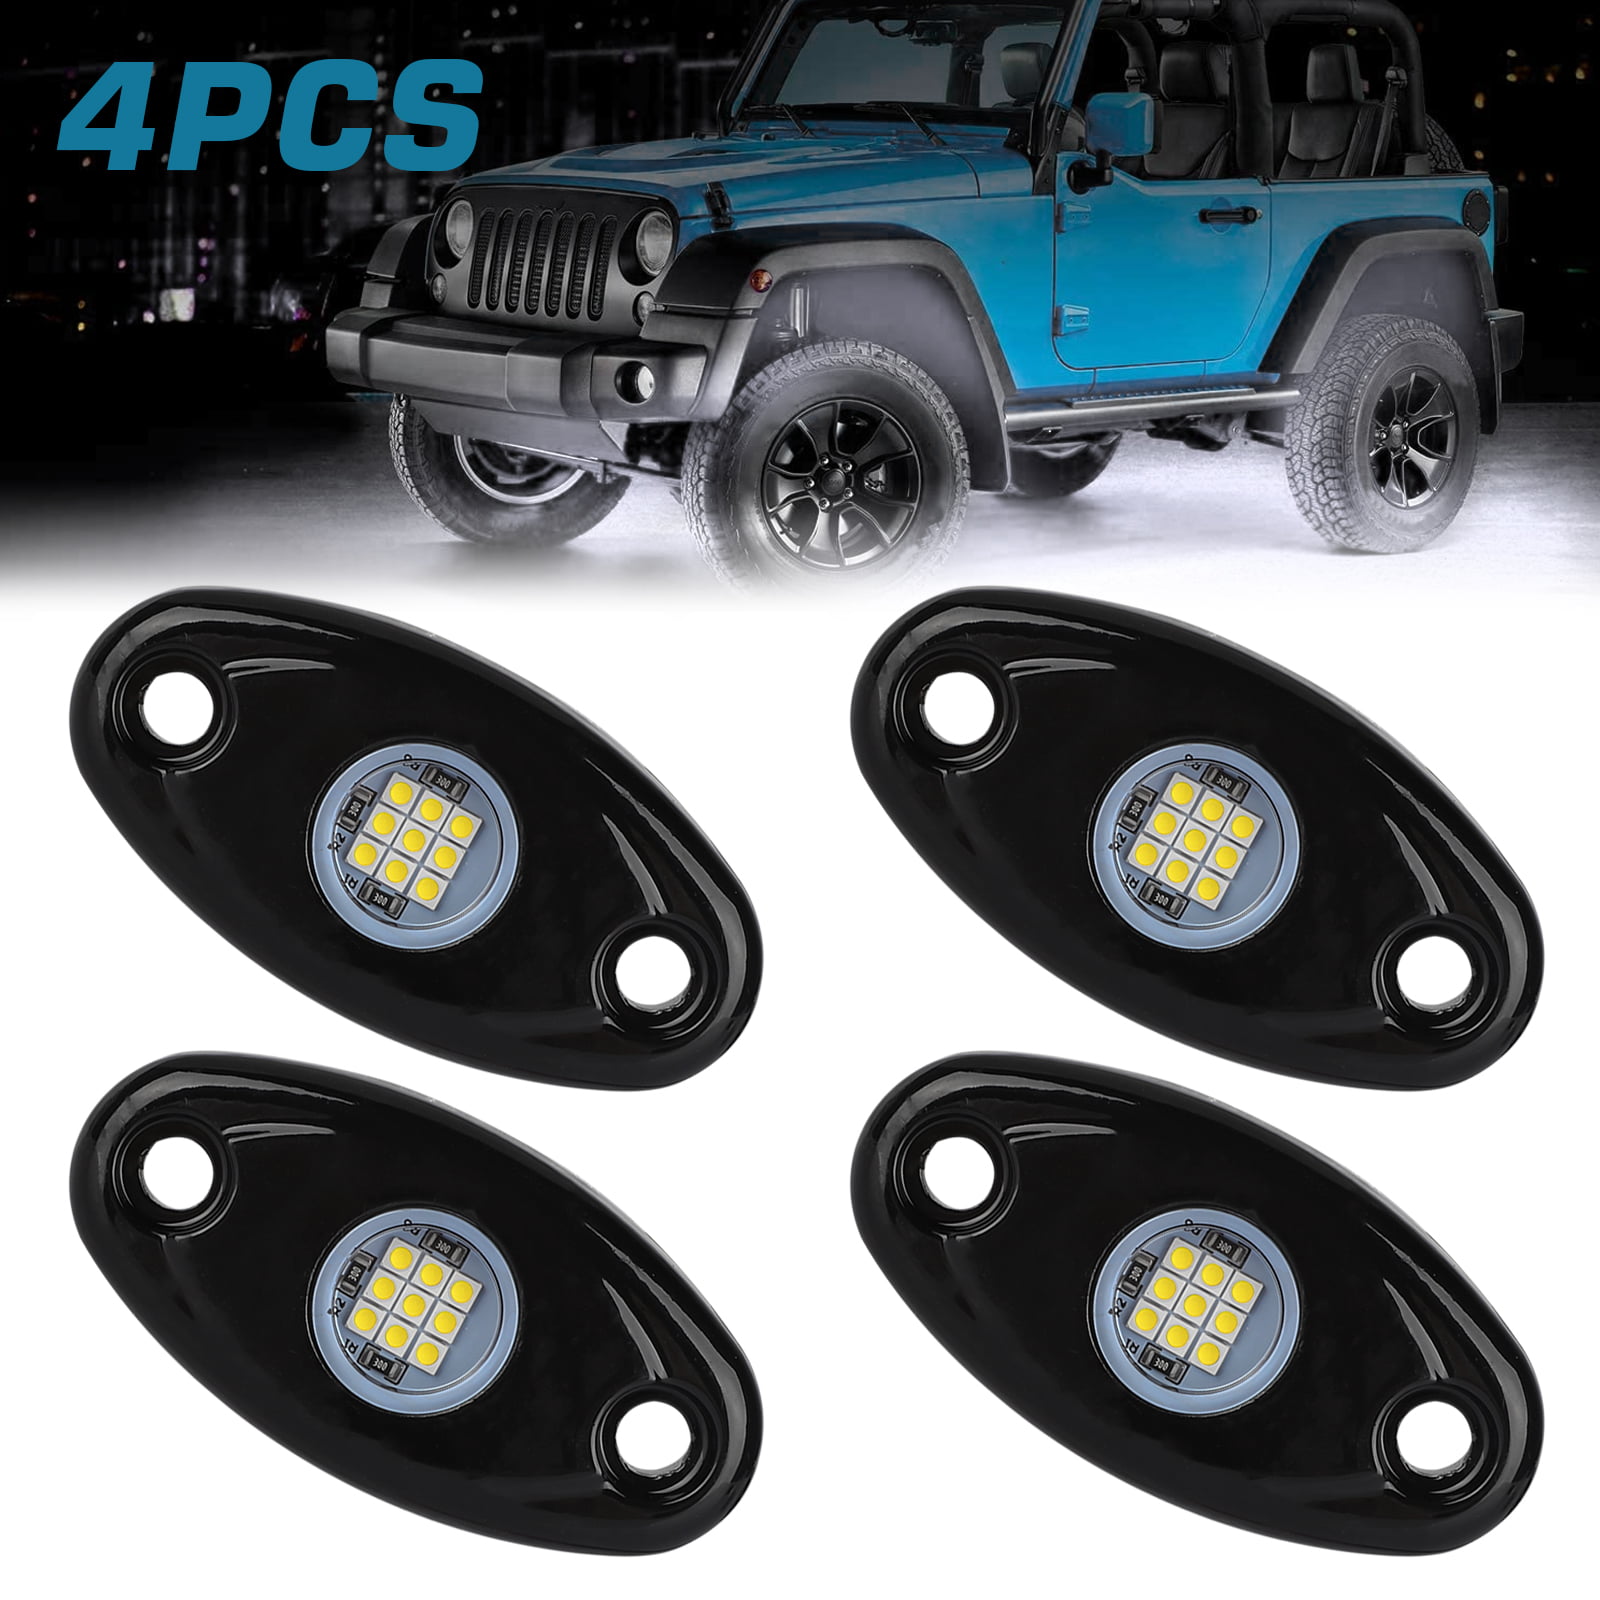 ANKIA 2 Pods LED Rock Lights Kit Waterproof LED Neon Underglow Light for Jeep Car Truck ATV UTV SUV Offroad Boat Underbody Glow Trail Rig Lamp 2 Pods, White 